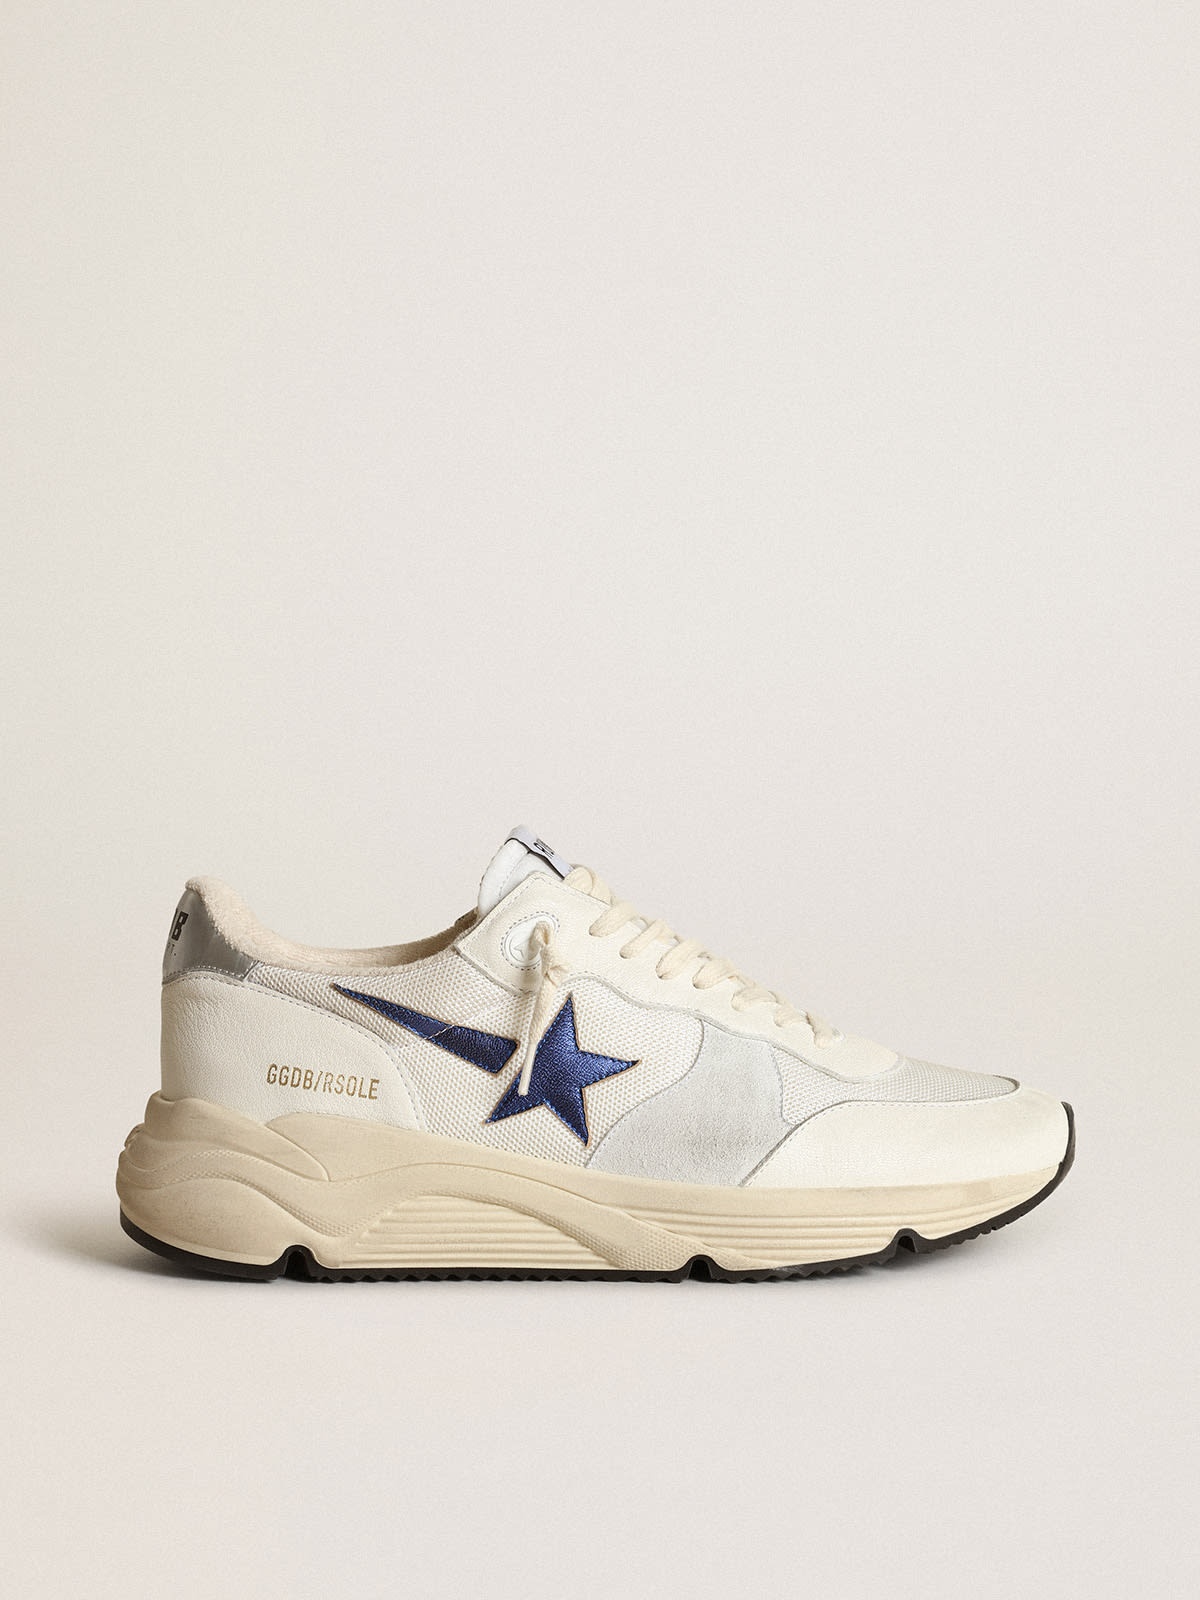 Running Sole in white mesh and nappa leather with a blue star - 1